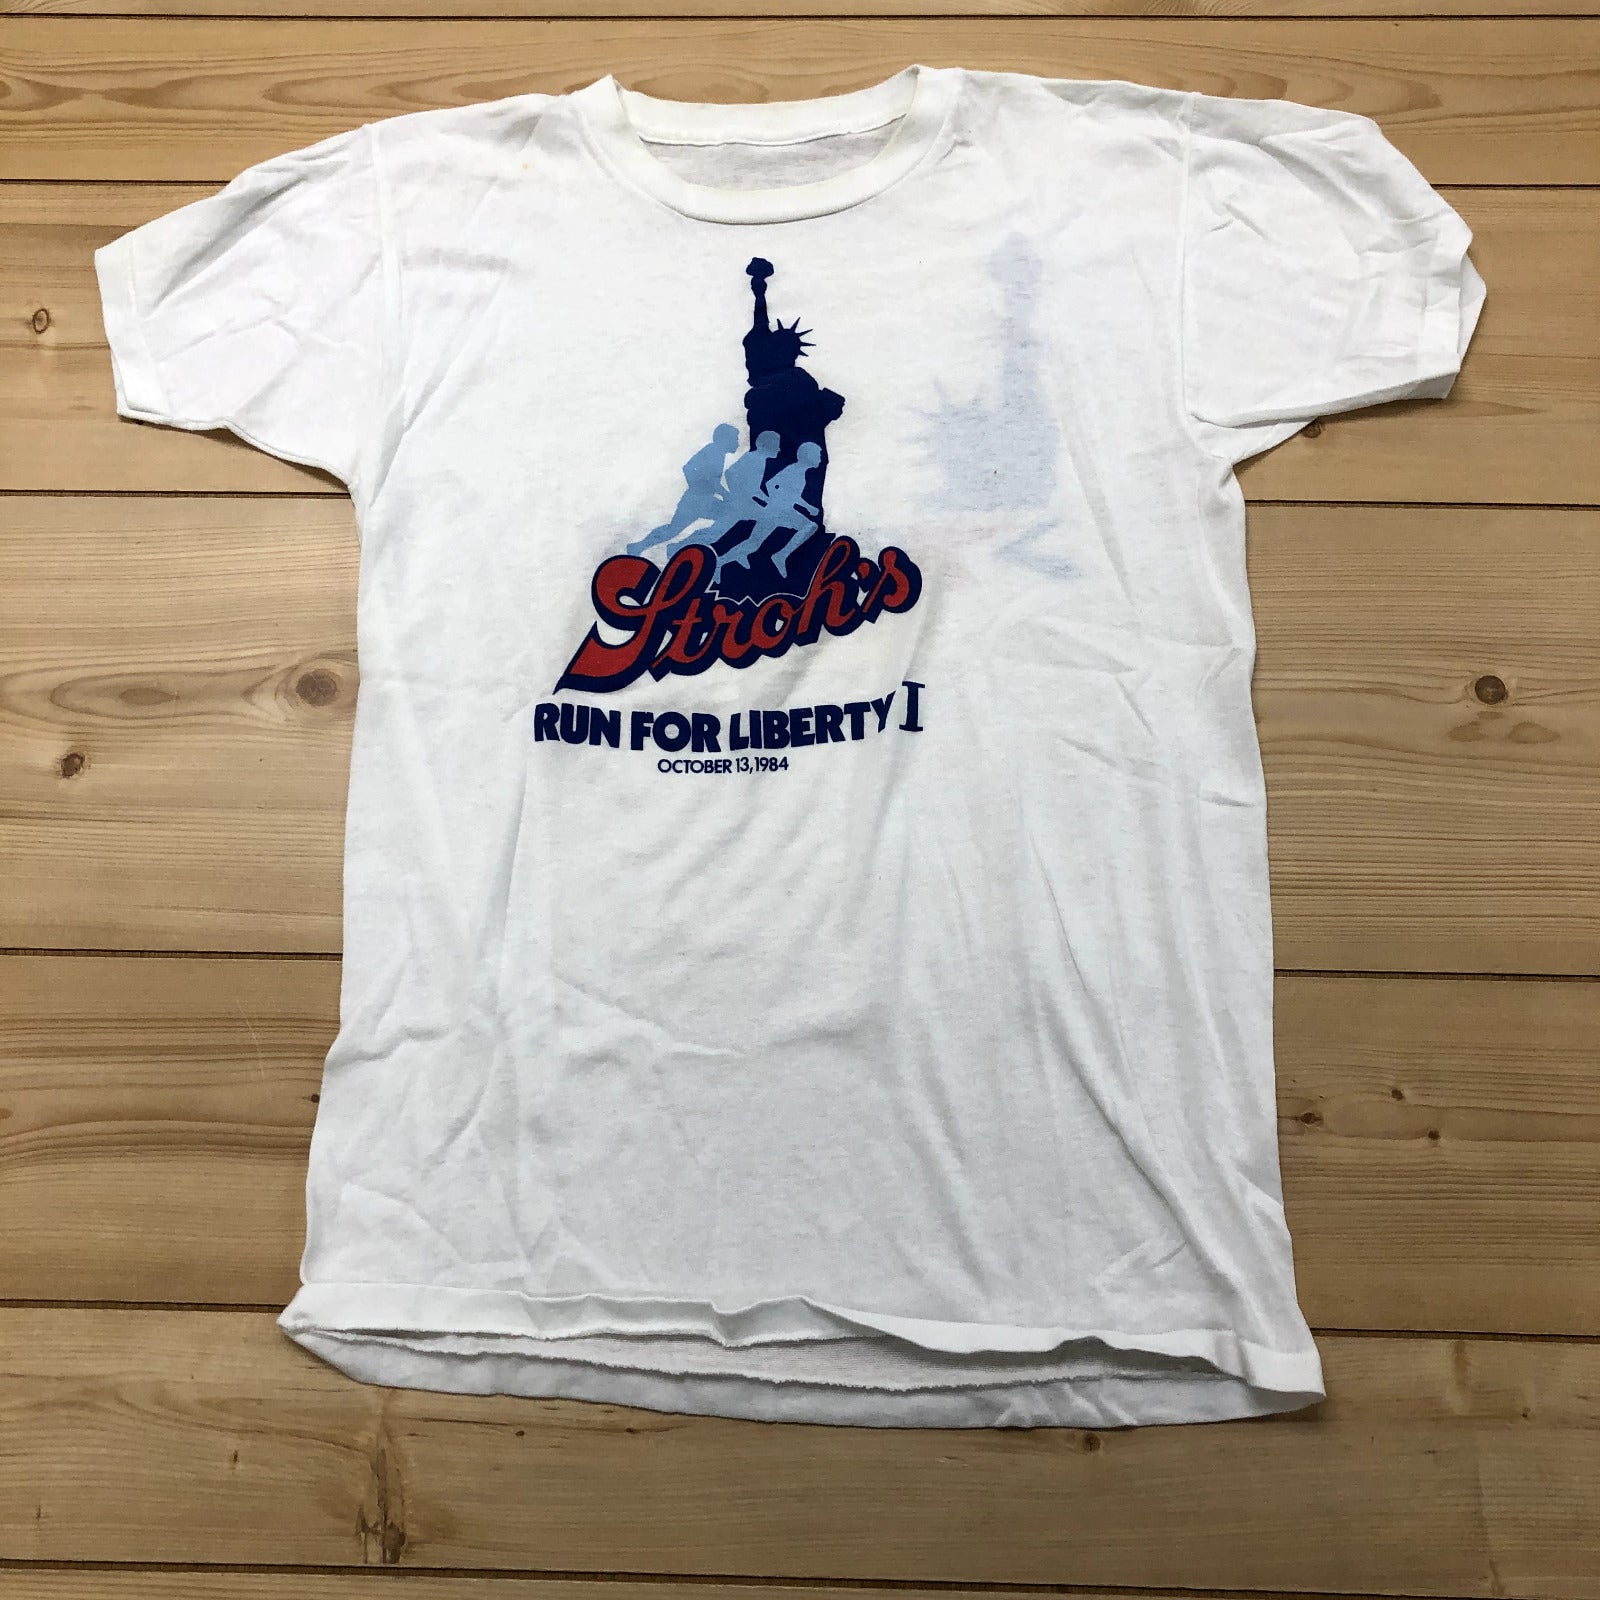 Vintage White Stroh's Run for Liberty 1984 Short Sleeve T-Shirt Adult Size S